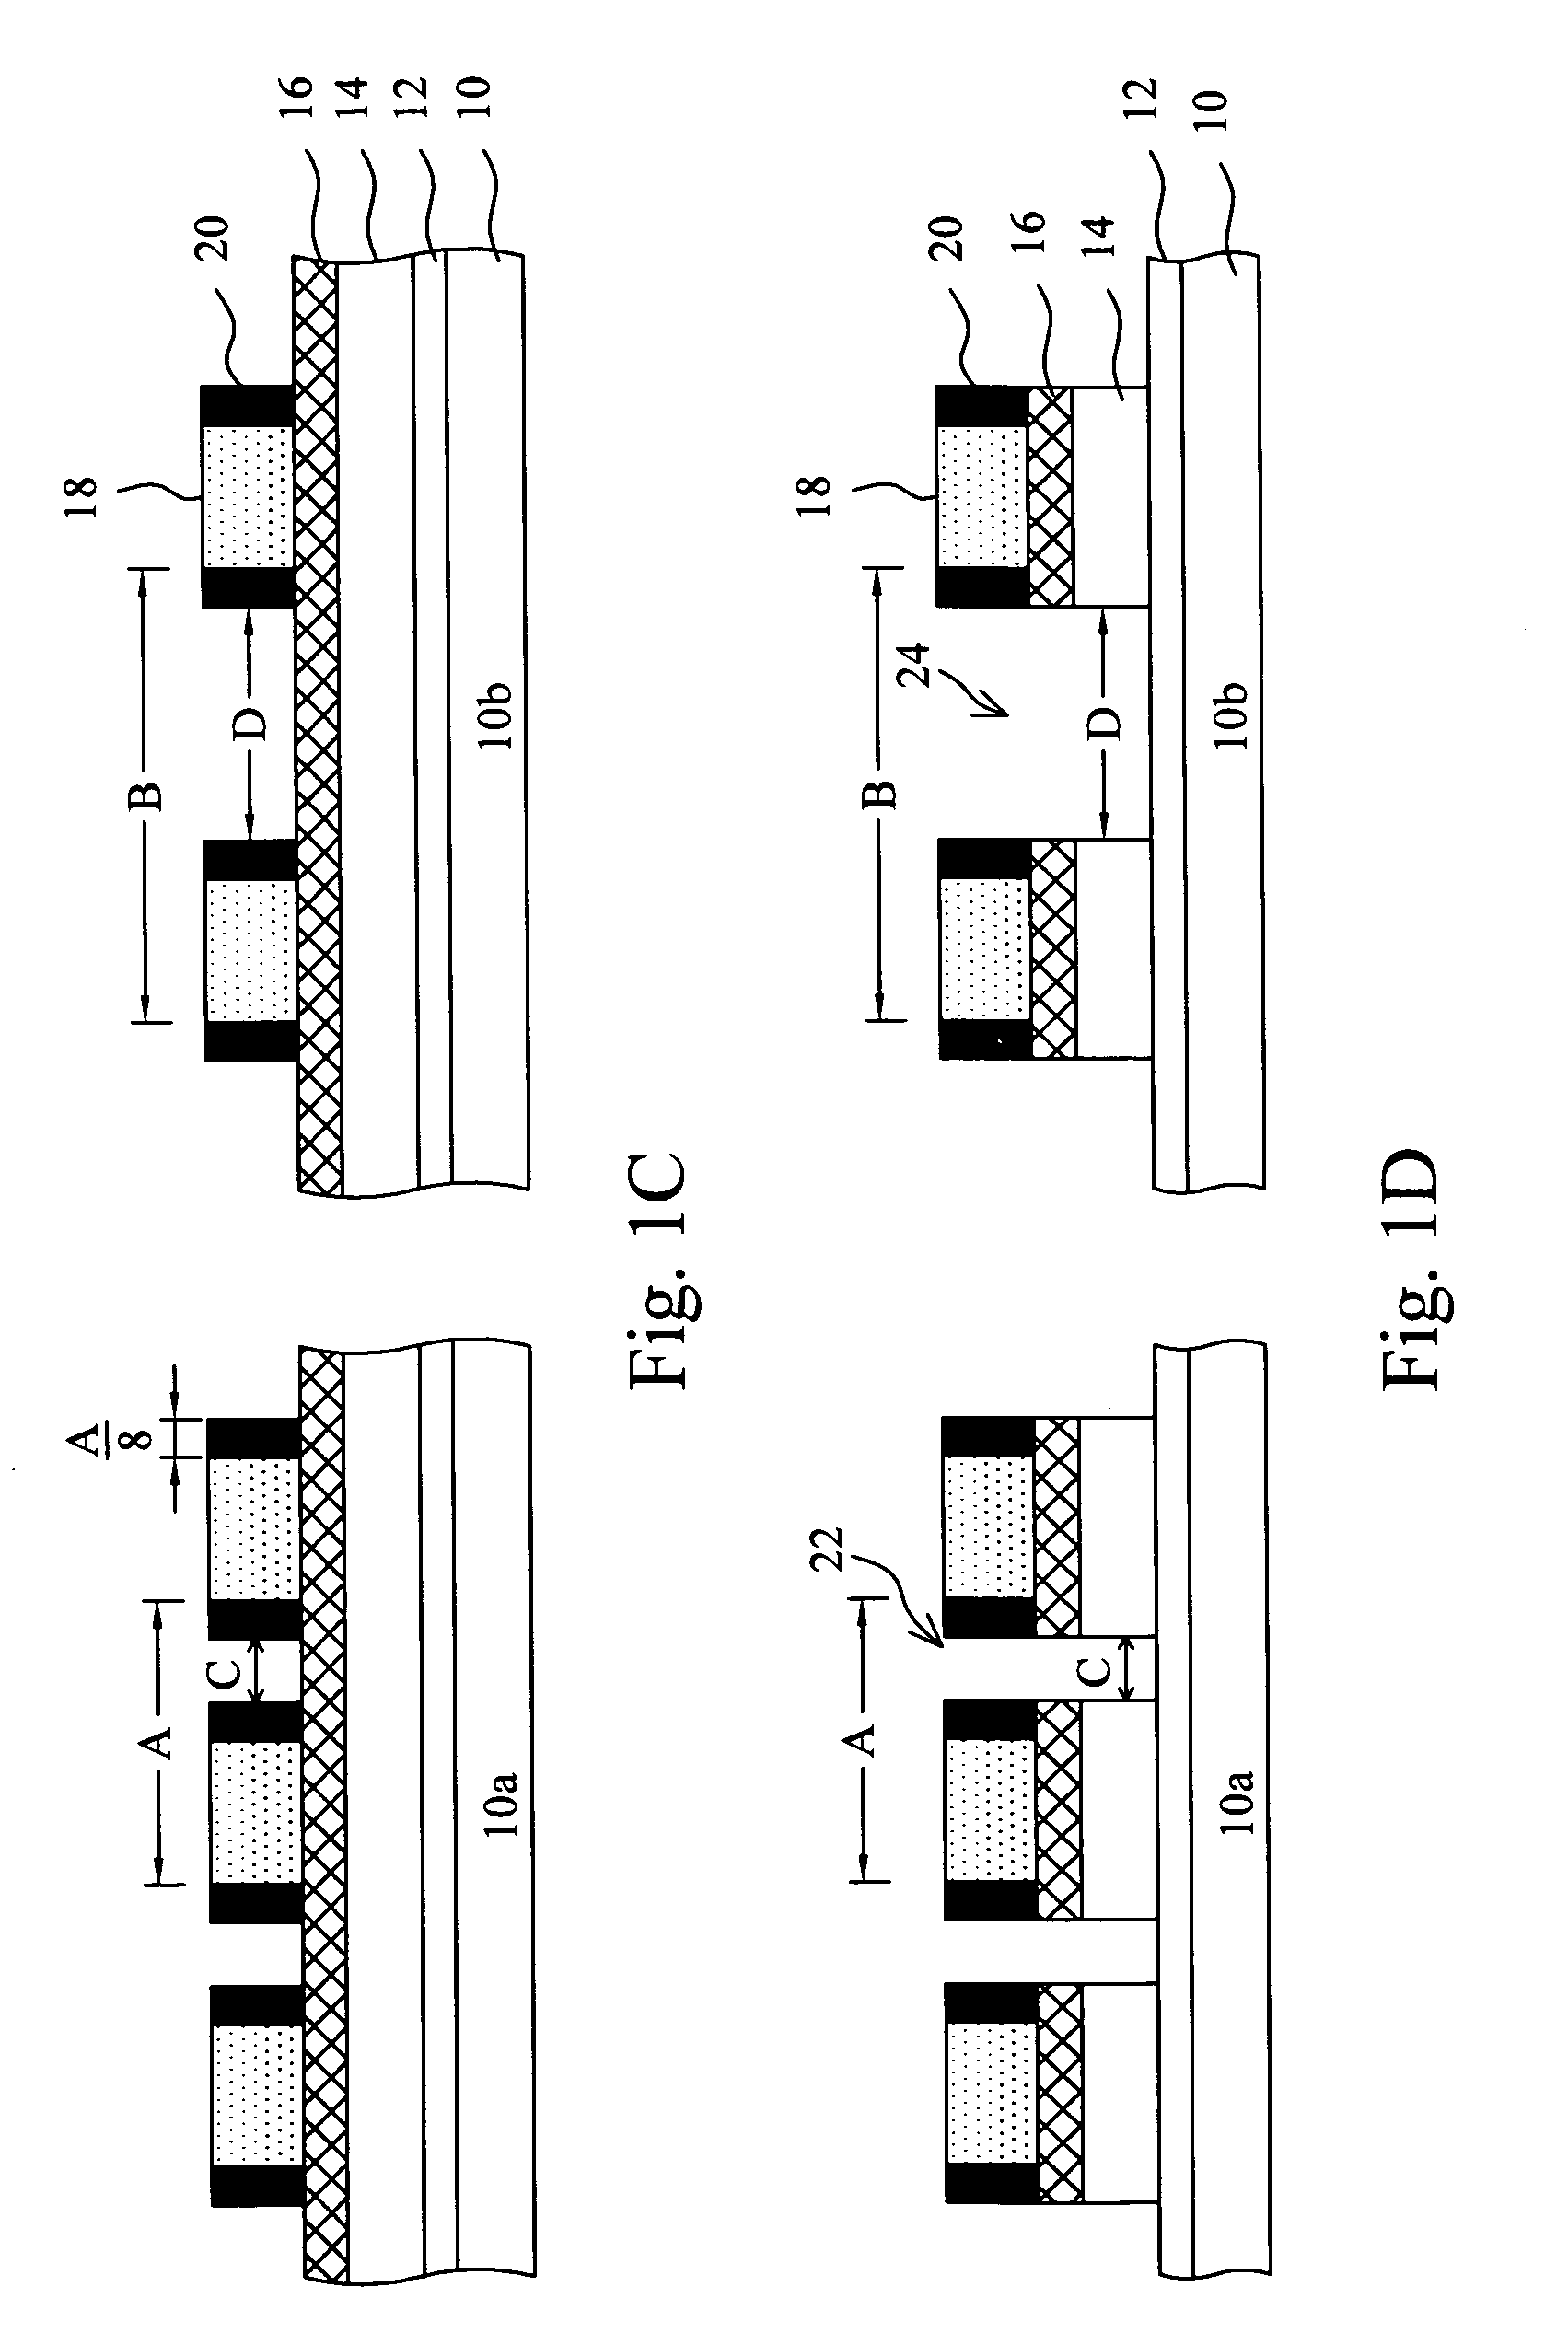 Method for defining a minimum pitch in an integrated circuit beyond photolithographic resolution